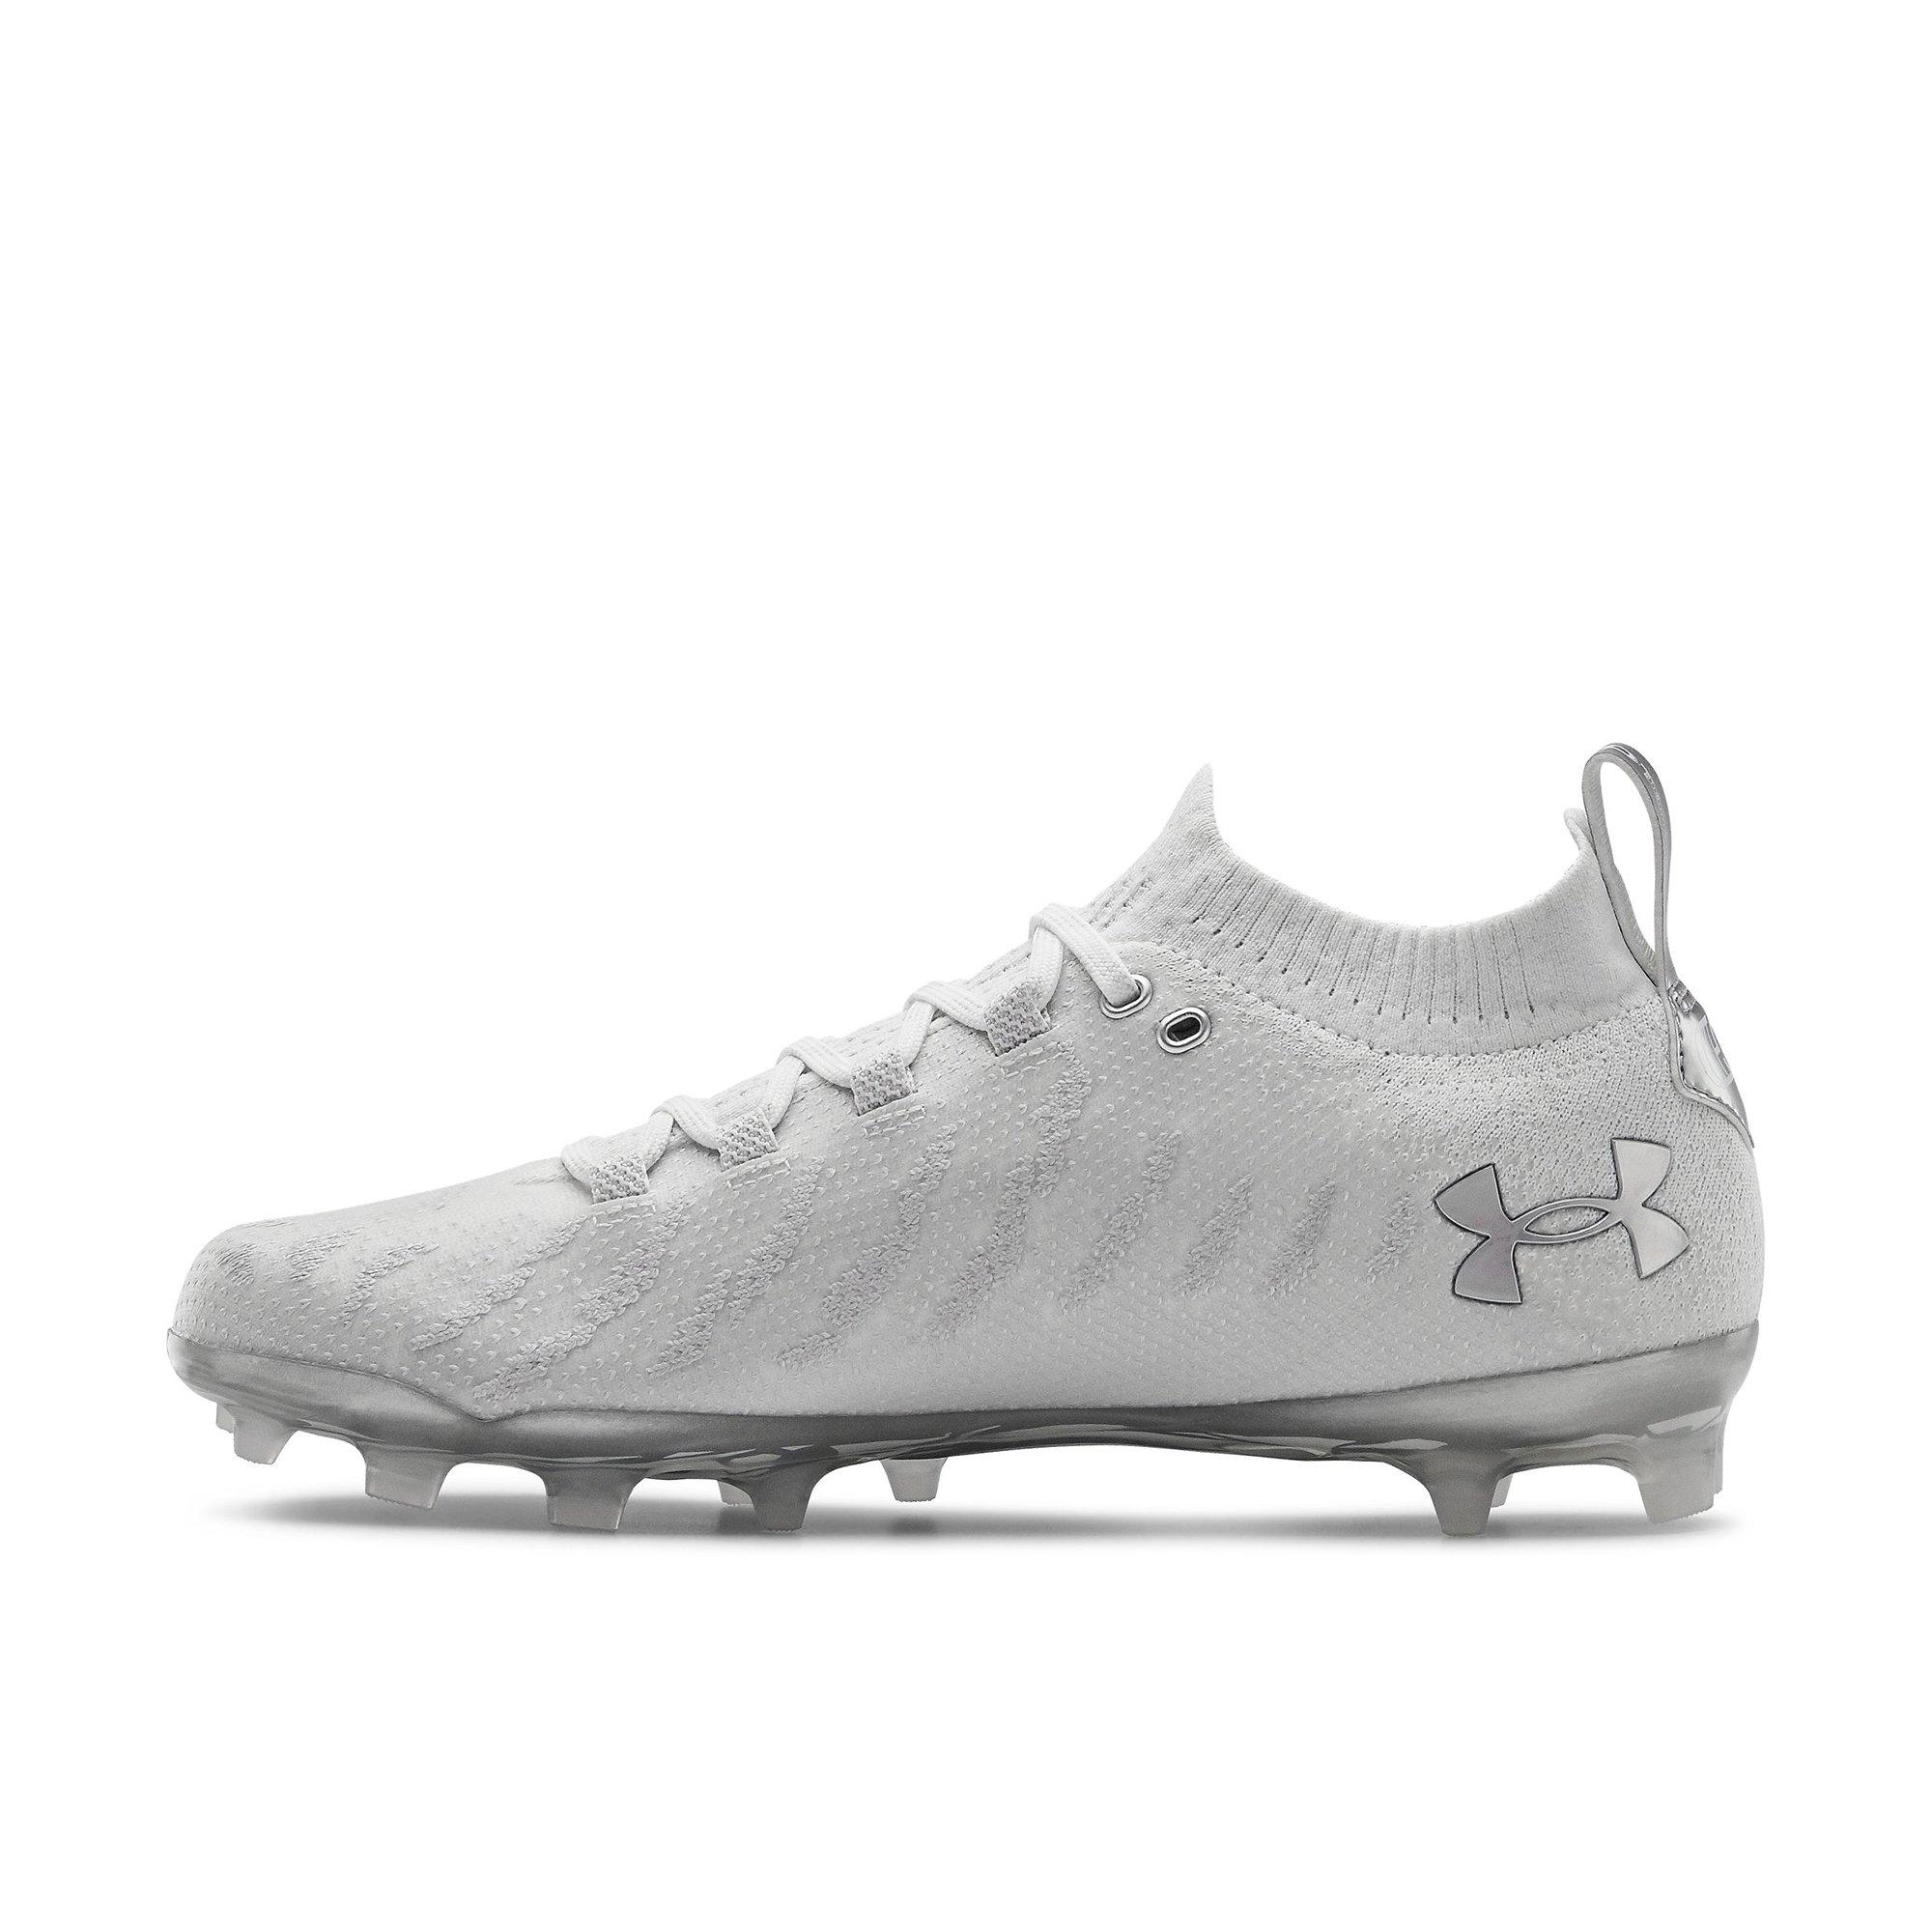 white under armour cleats football